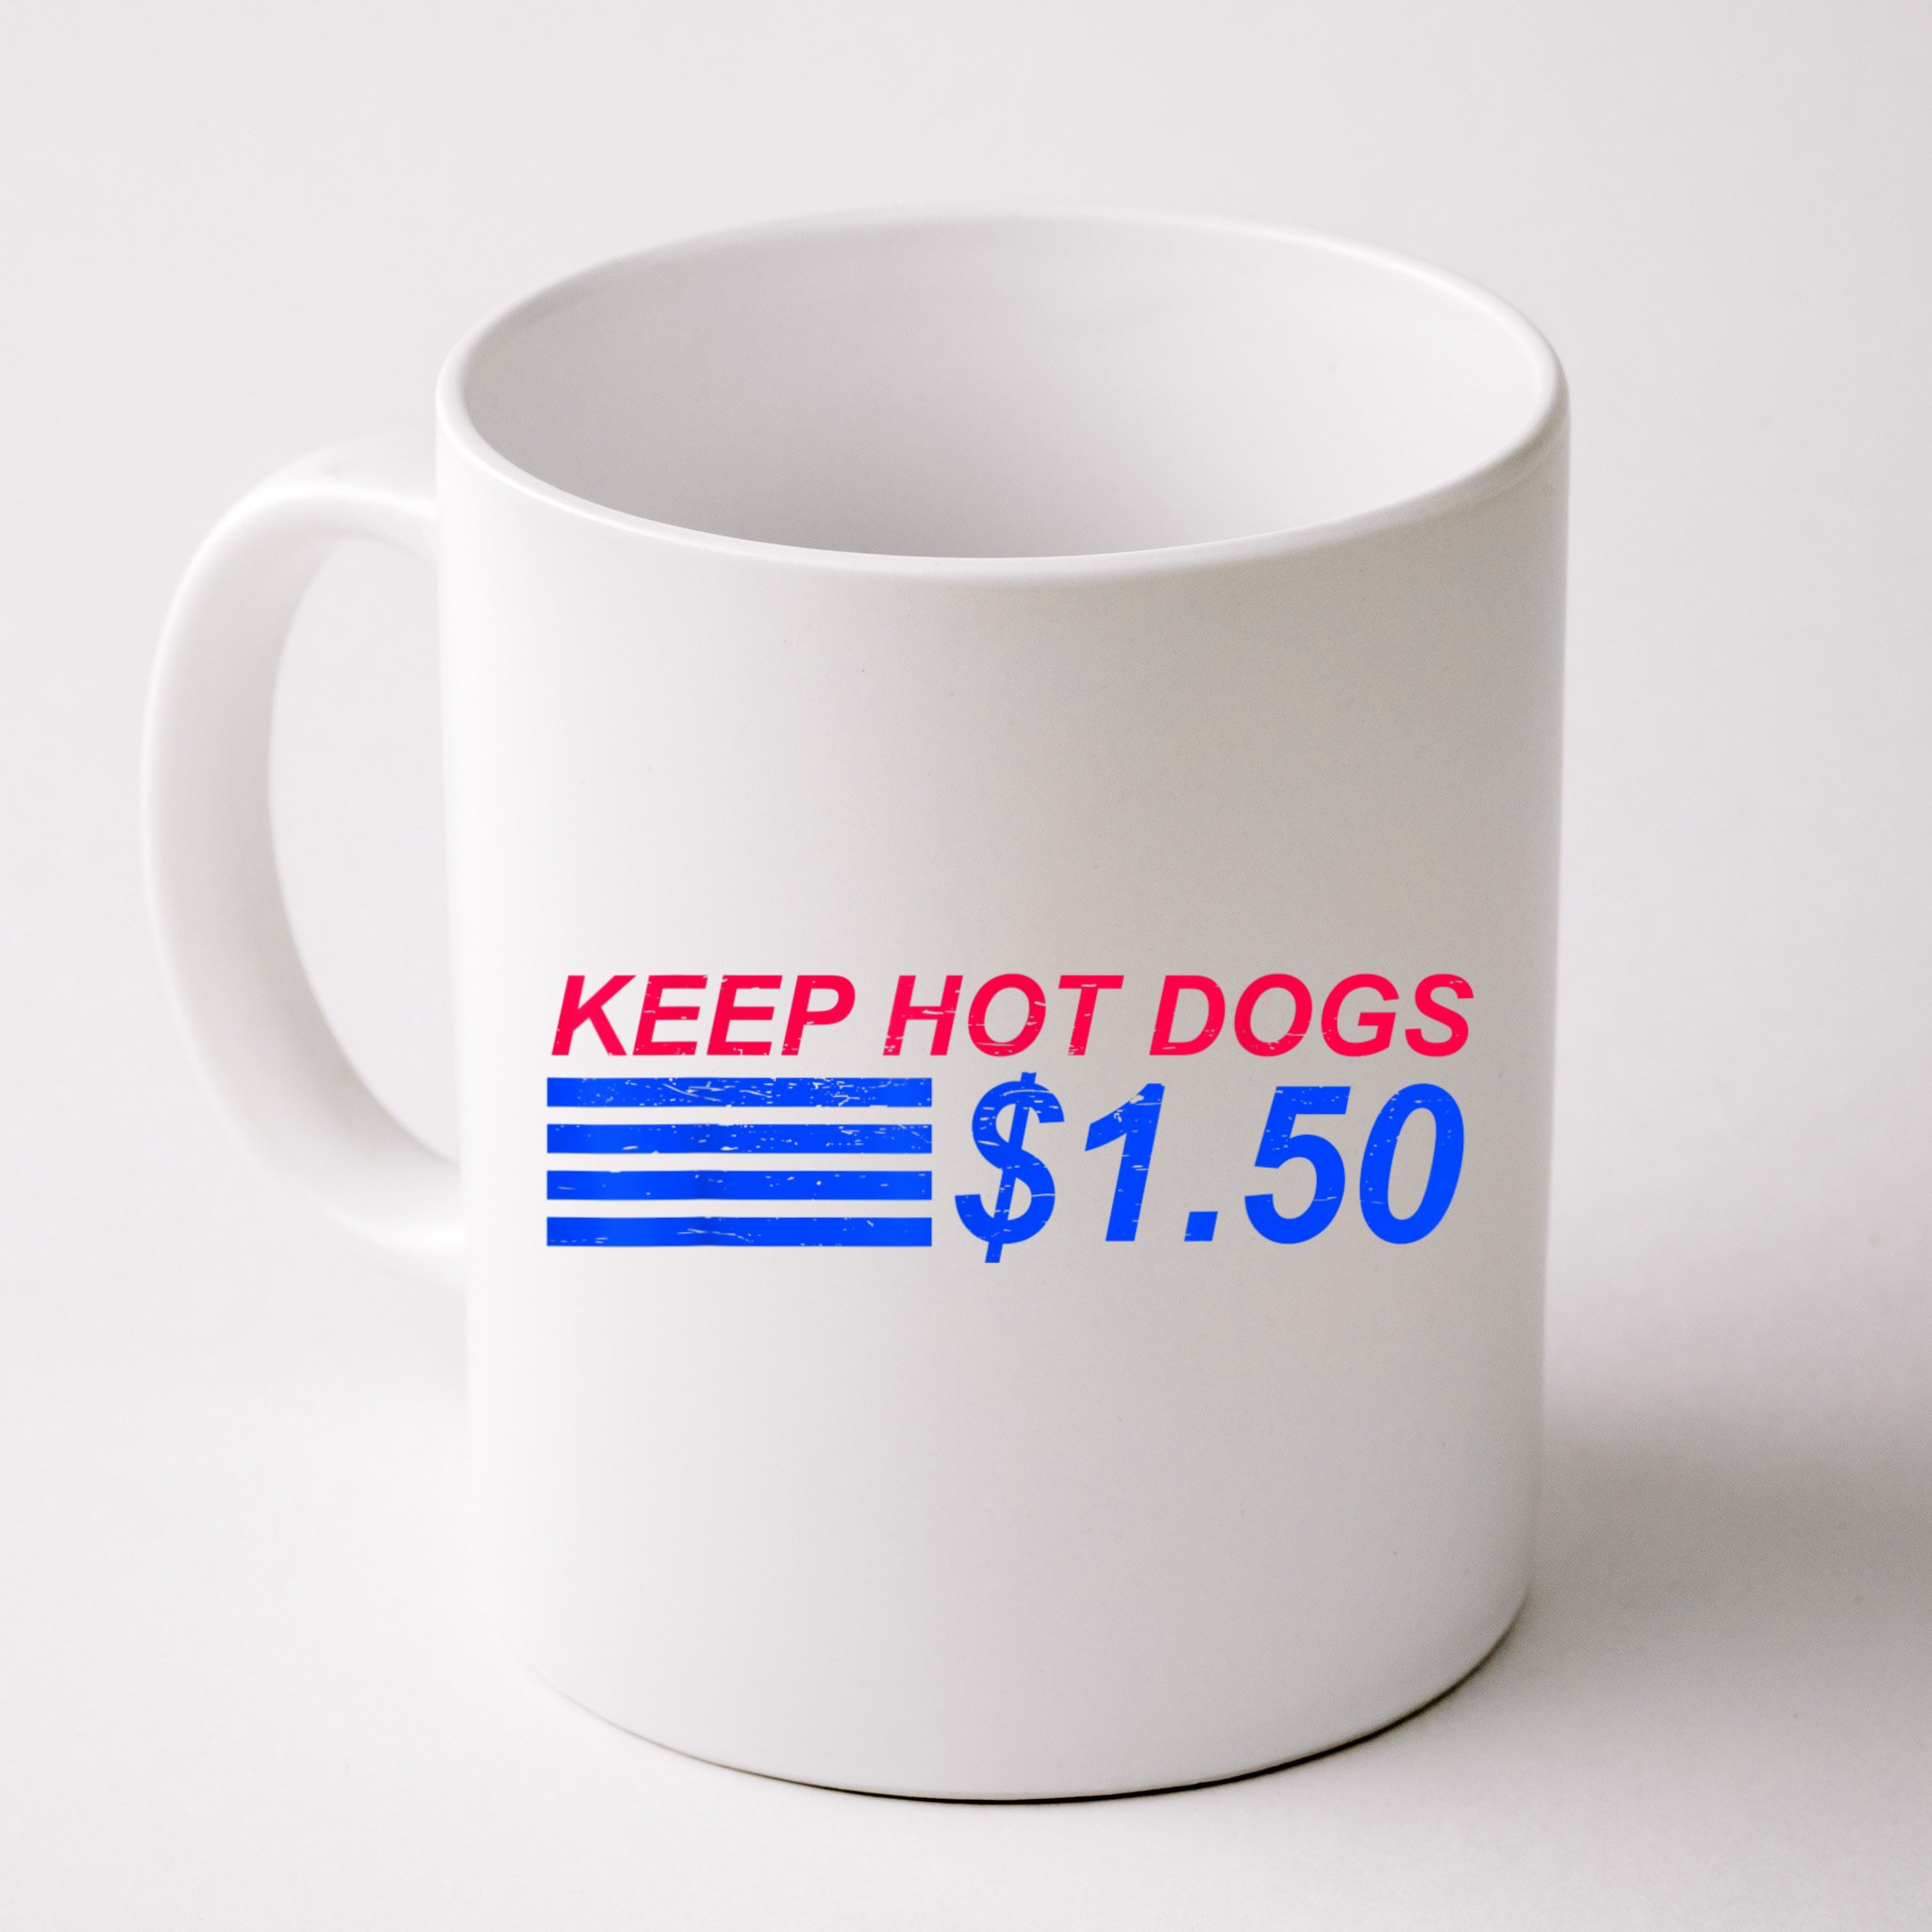 https://images3.teeshirtpalace.com/images/productImages/khd9363127-keep-hot-dogs-at-1-50-dollars--white-cfm-front.jpg